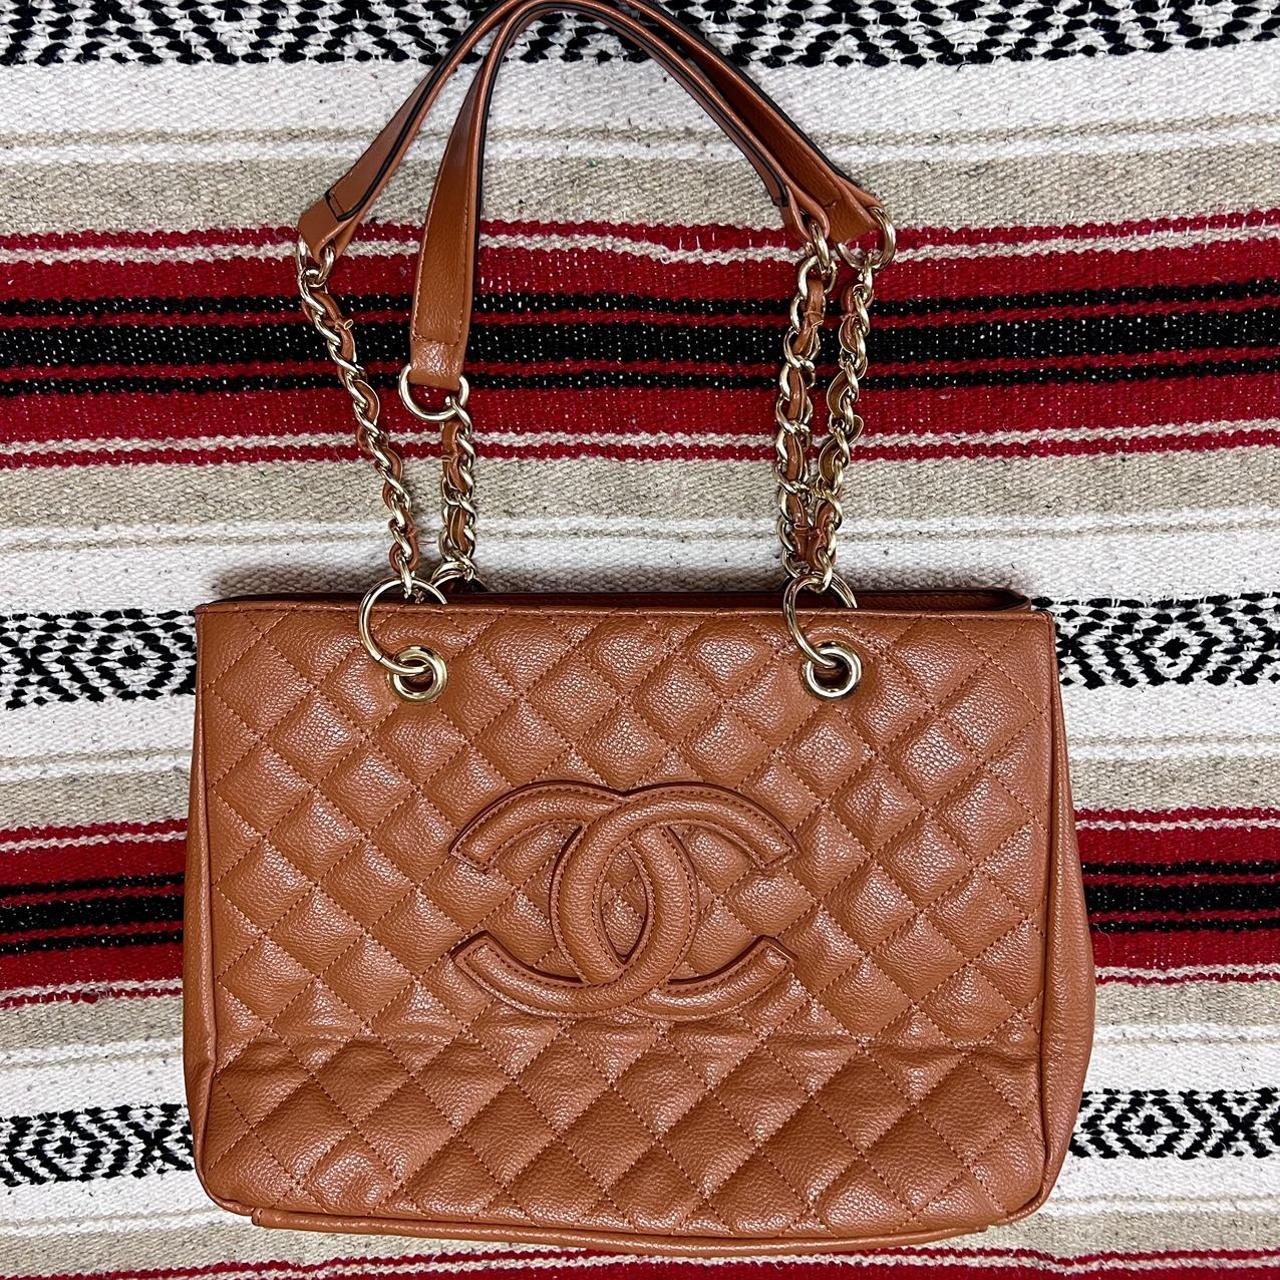 Used chanel BROWN QUILTED GRAND SHOPPING TOTE HANDBAGS HANDBAGS